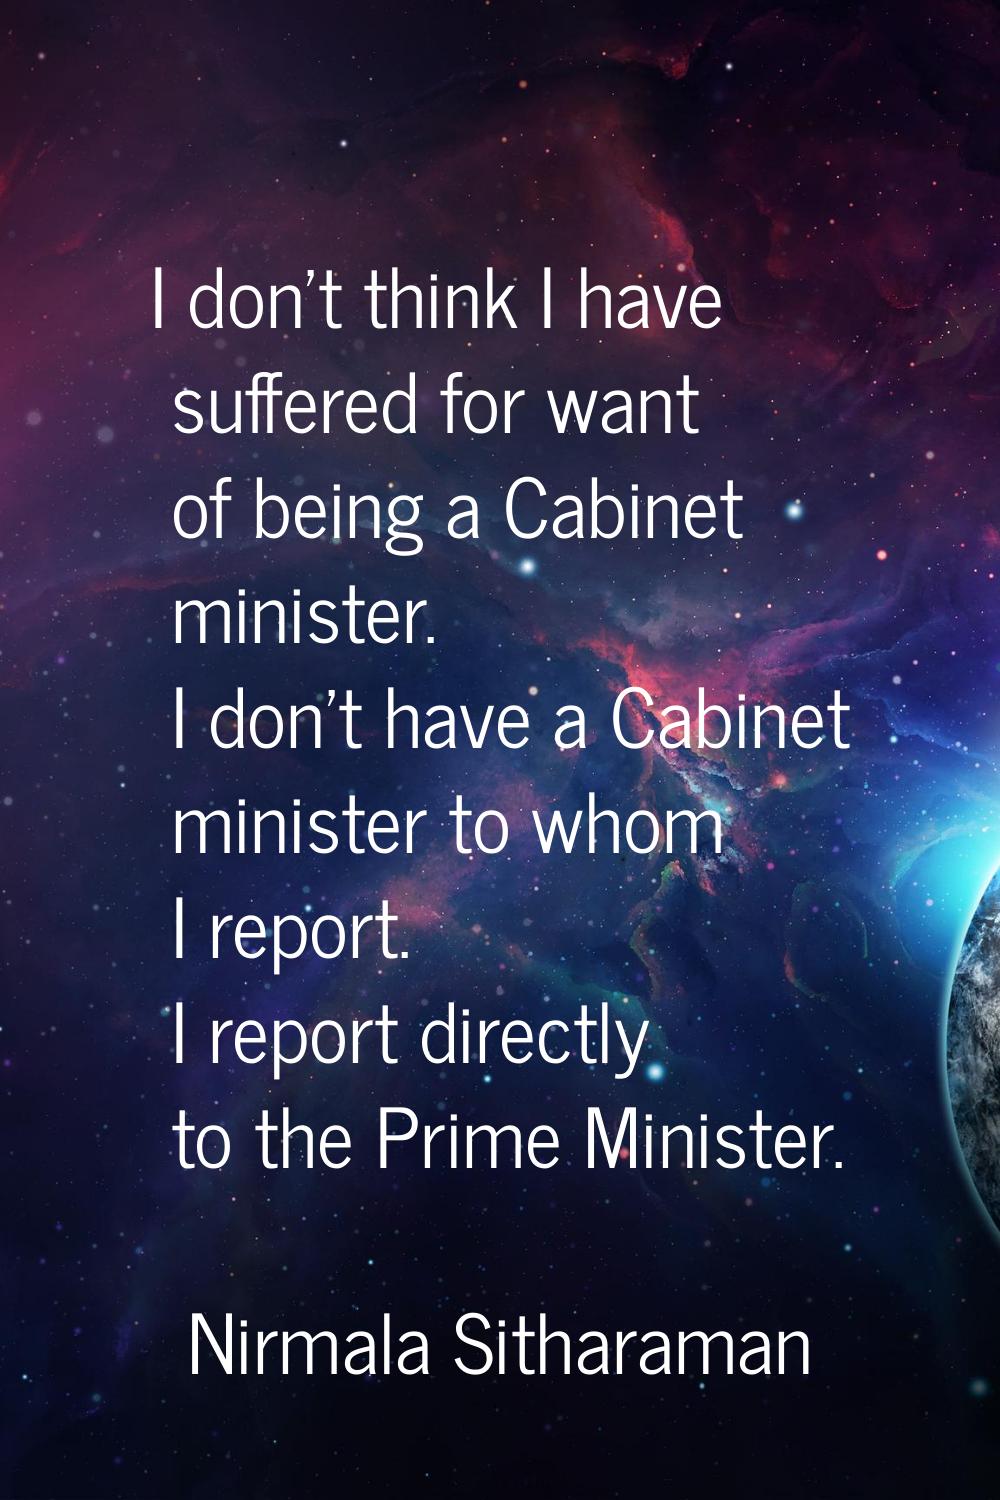 I don't think I have suffered for want of being a Cabinet minister. I don't have a Cabinet minister